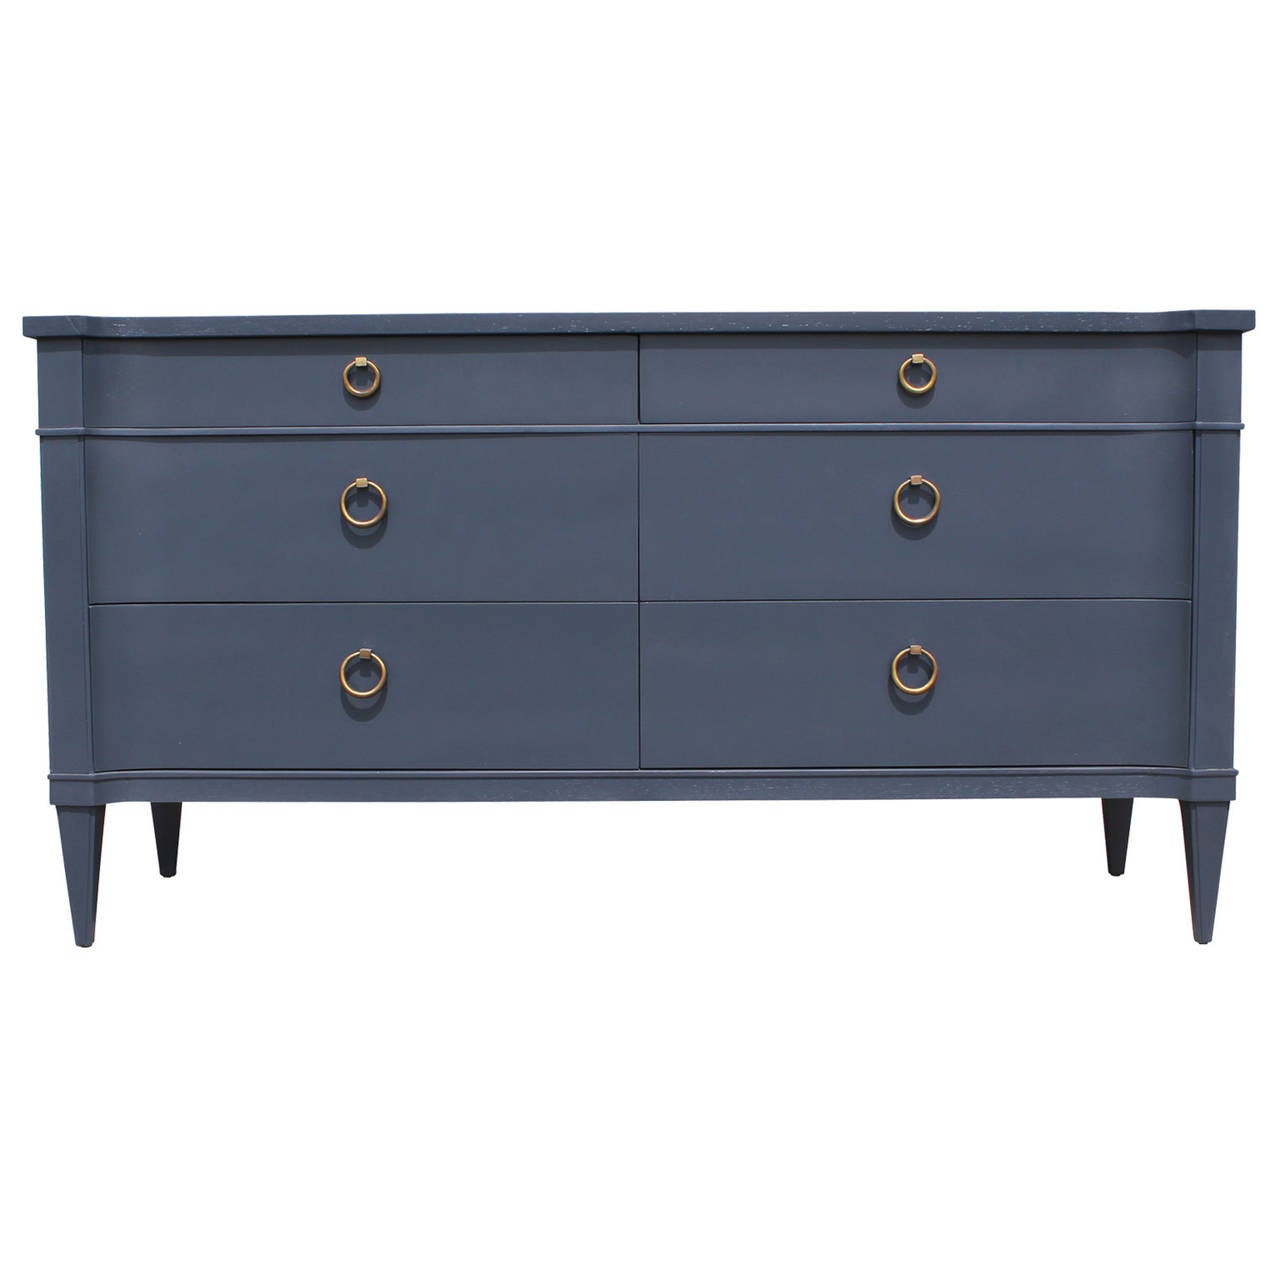 Stunning French blue grey dresser made by Drexel. The Chest has nice patinaed brass ring handles. A slight curve to the front adds visual interest.